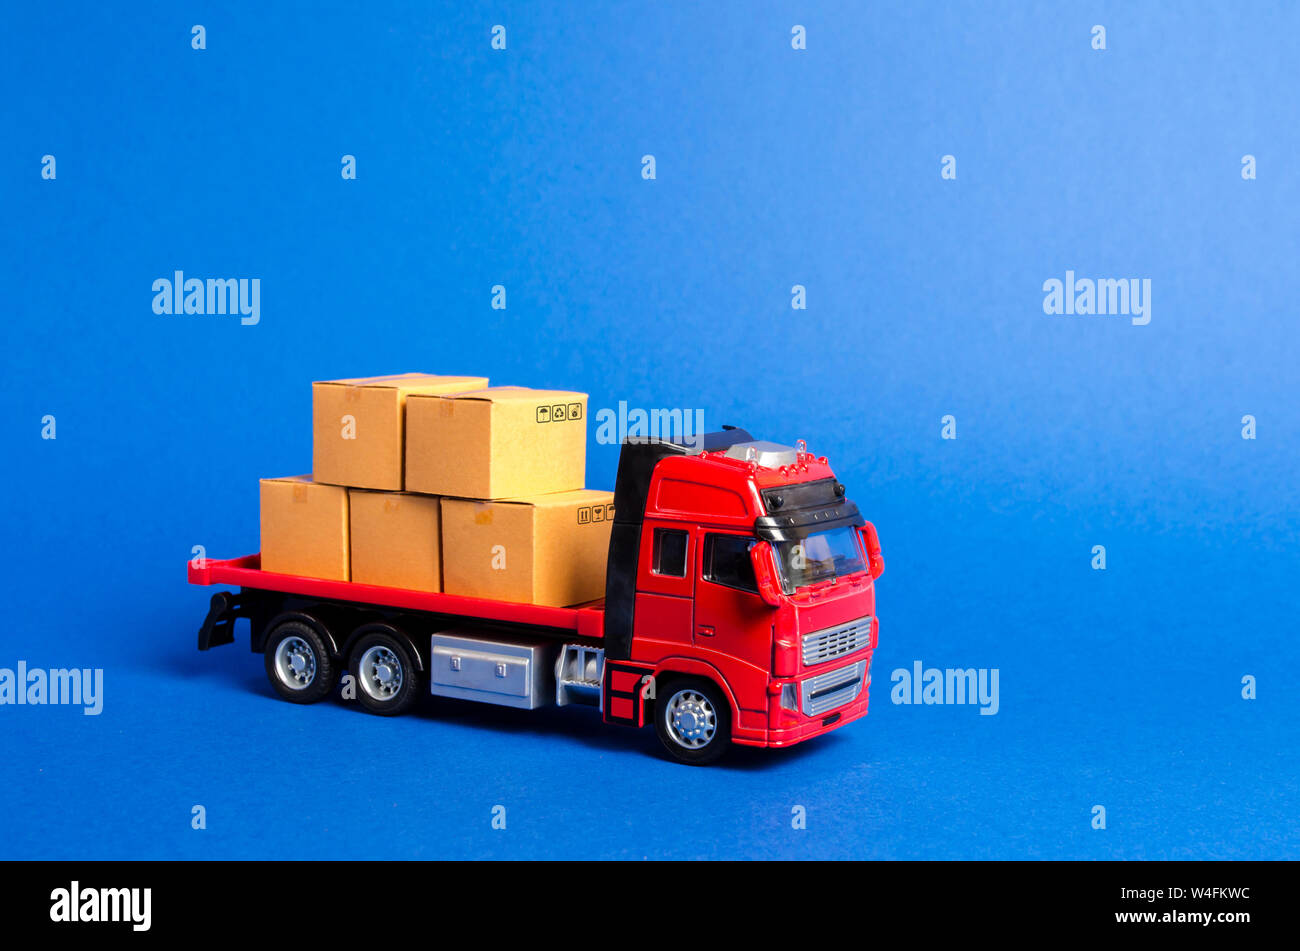 A red truck loaded with boxes. Services transportation of goods and products, logistics and infrastructure. Transportation company. Warehousing and su Stock Photo